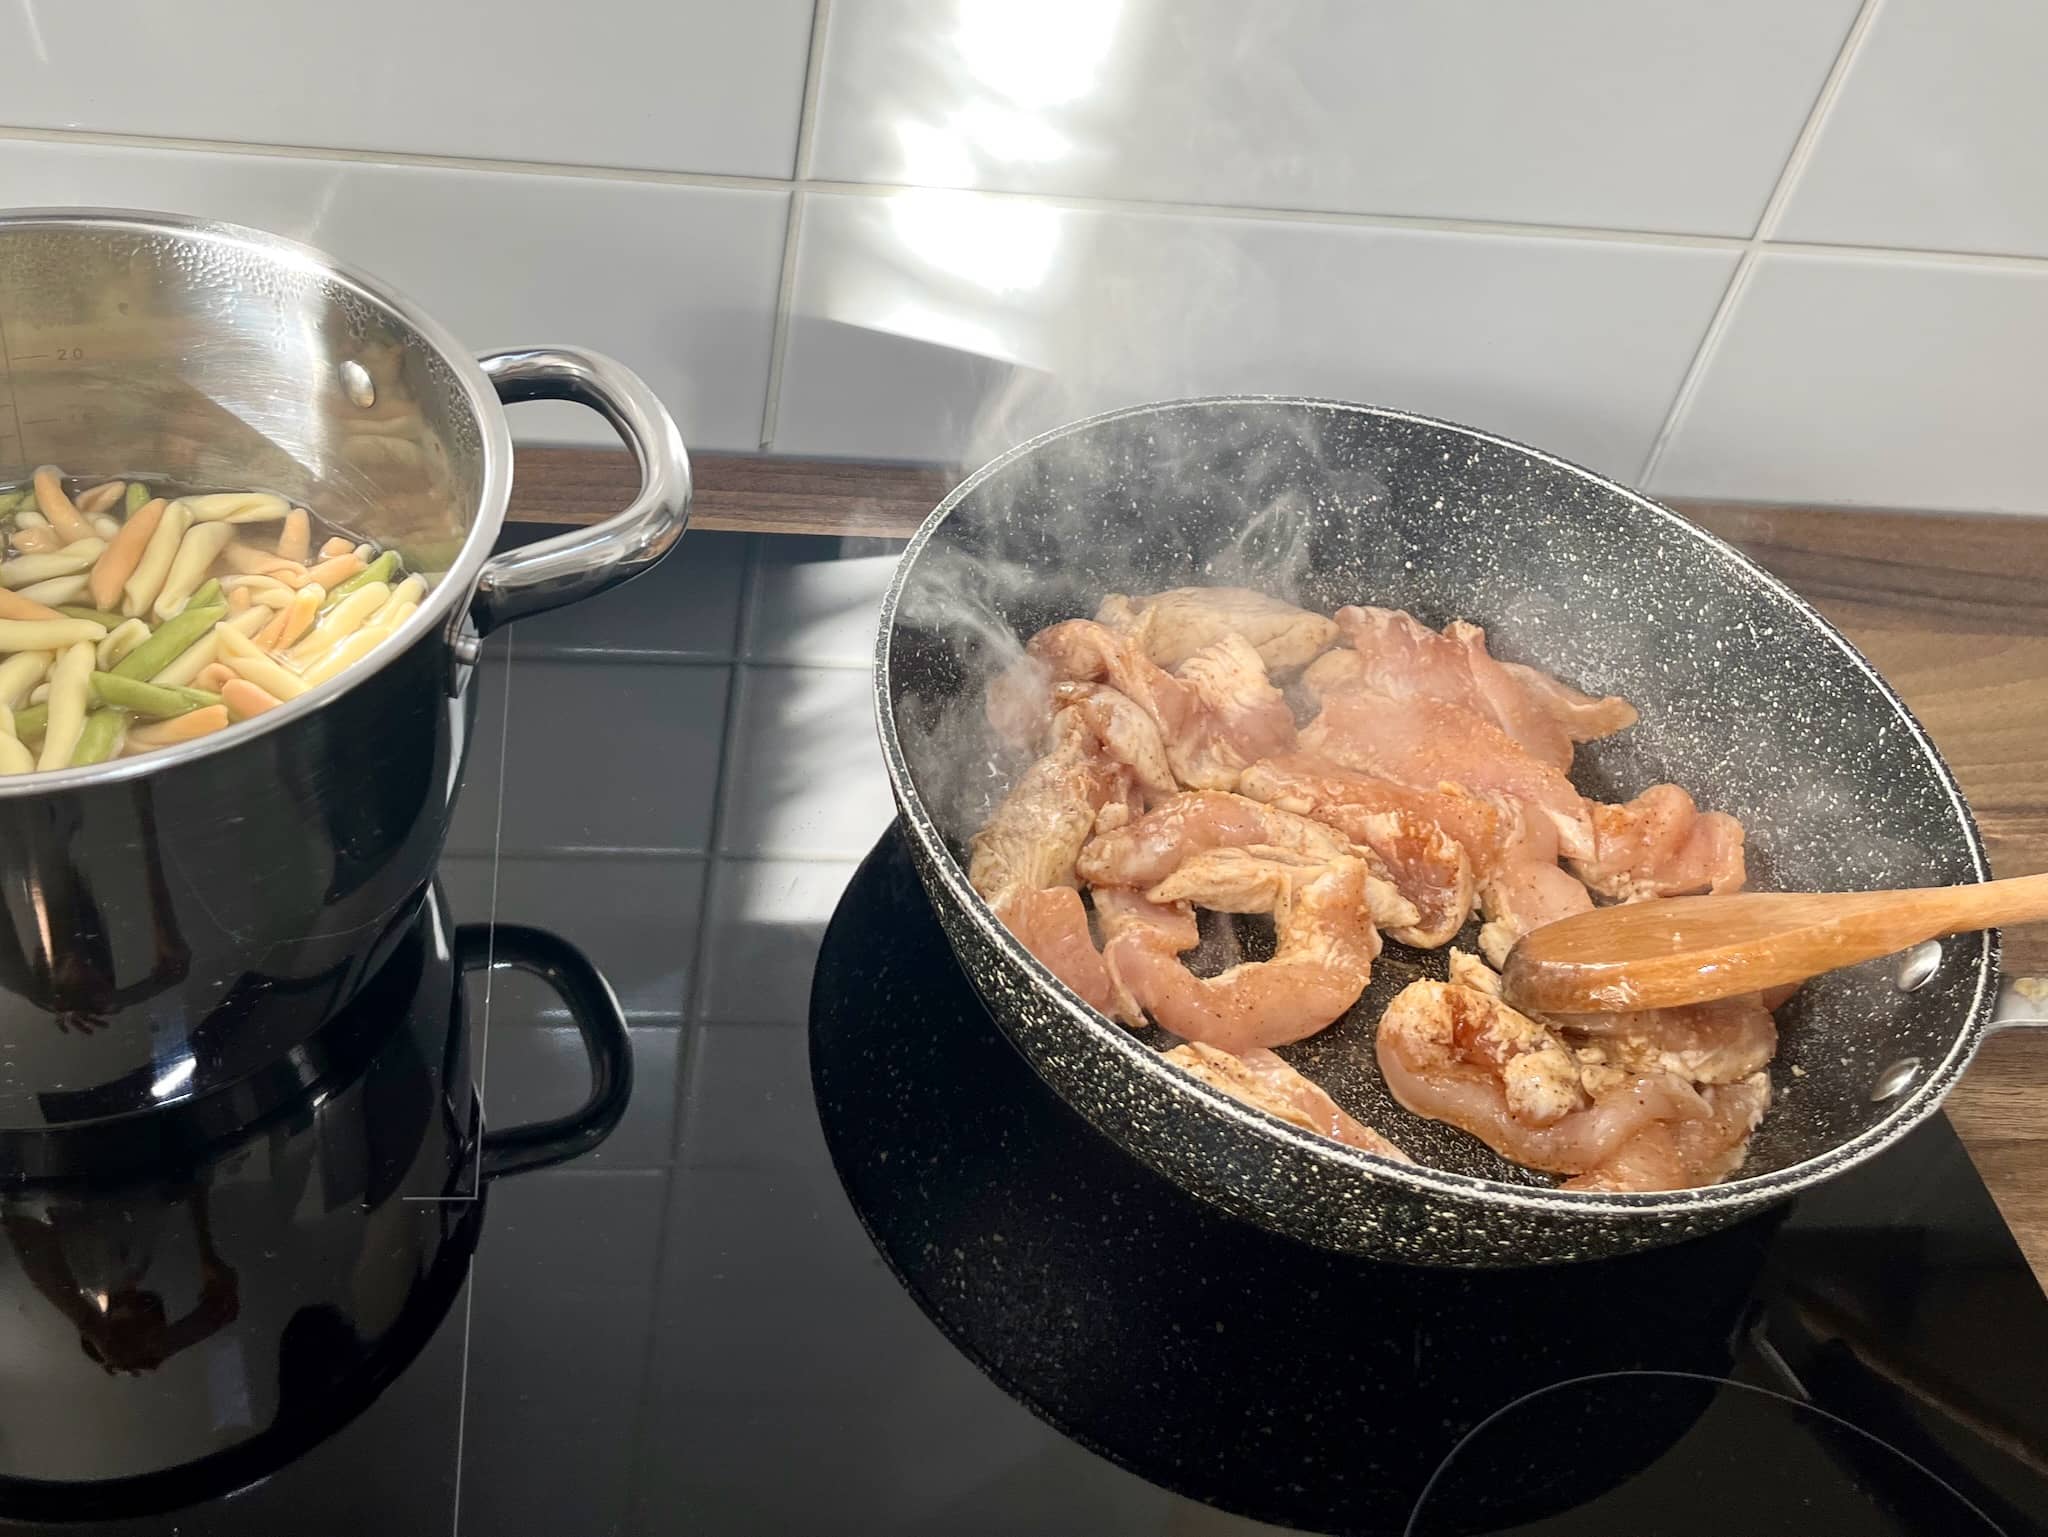 The pasta is cooking in a pan on the stovetop, and the chicken is frying in a large skillet over medium heat.